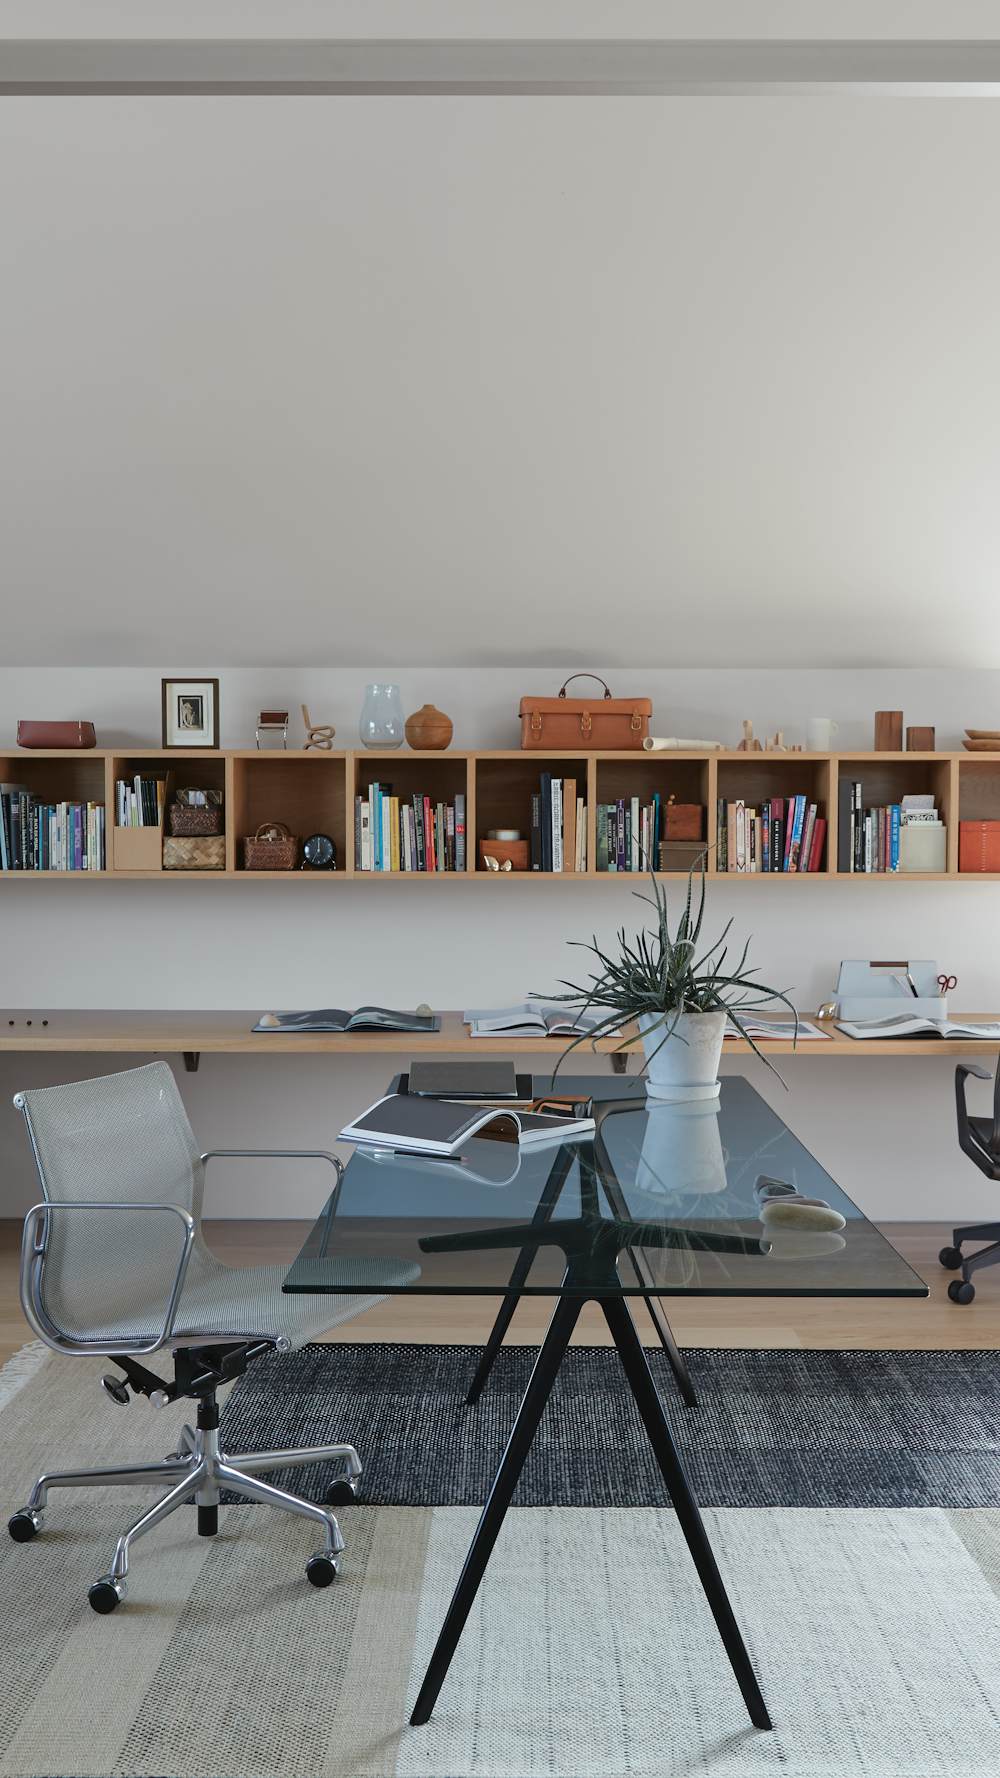 Eames Aluminum Group Office Chair with Baguette Table in a home office setting